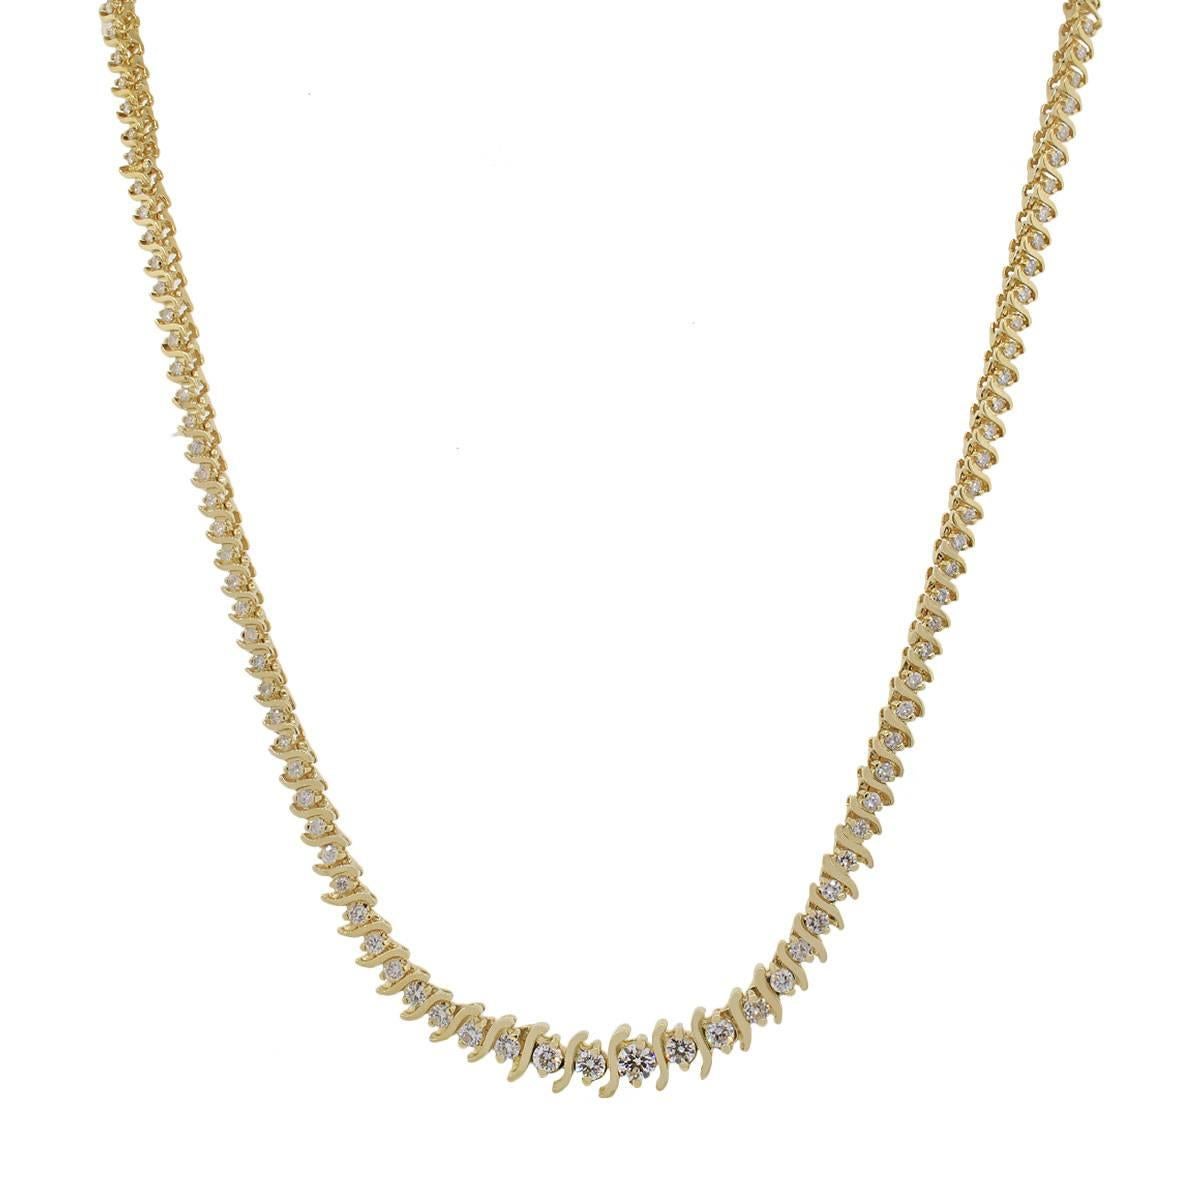 Material: 18k yellow gold
Style: Graduated Diamond Tennis Necklace
Diamond Details: Approximately 3.60ctw of round brilliant diamonds. Diamonds are H/I in color and SI in clarity.
Measurements: Necklace is 17" in length
Clasp: Tongue in box